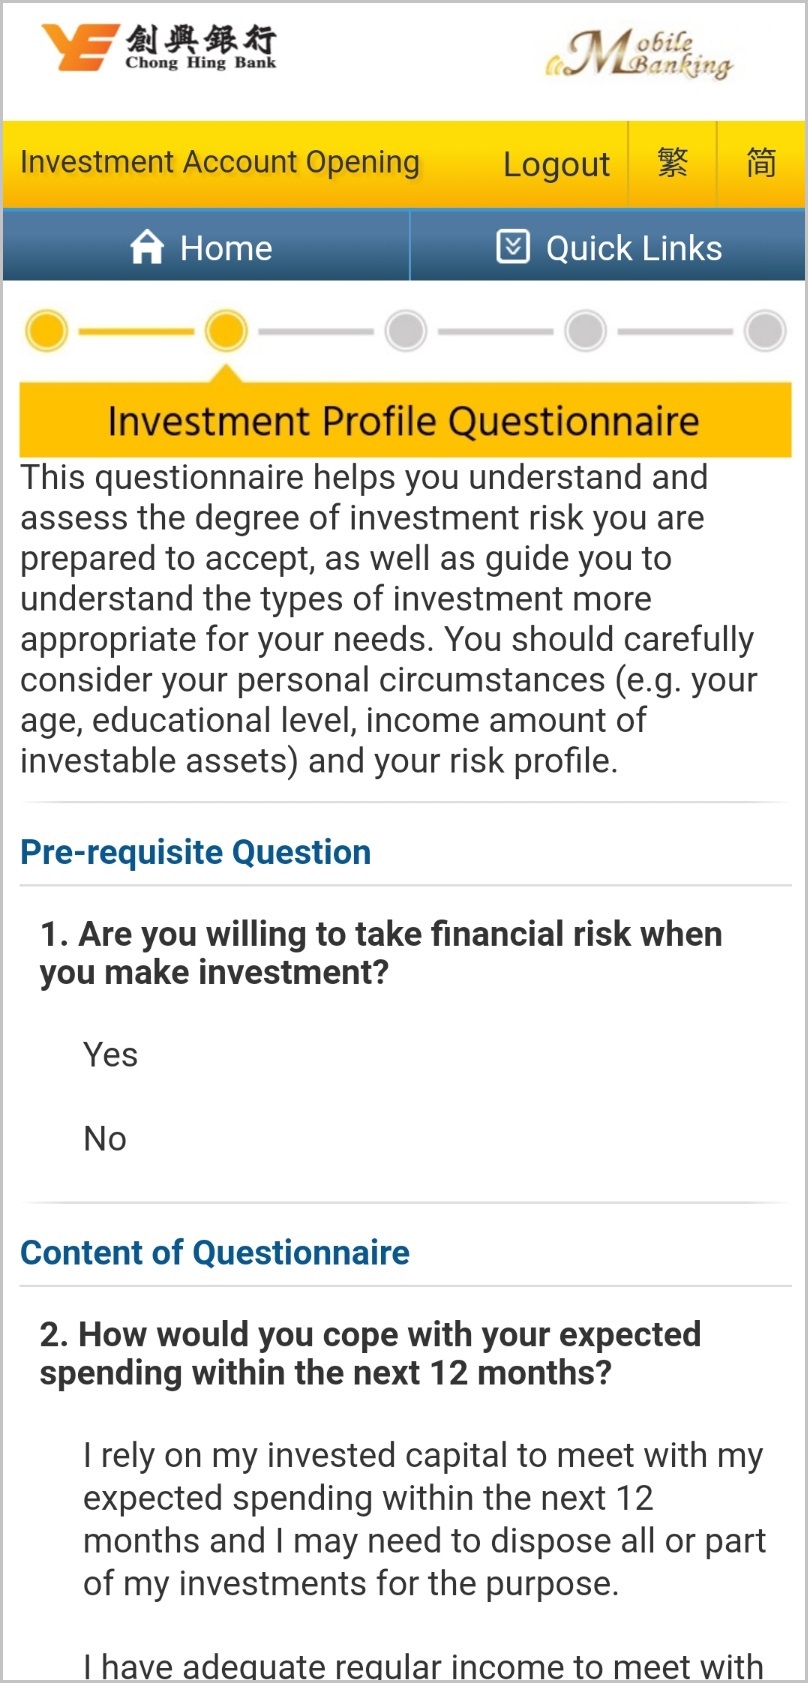 Complete the Investment Profile Questionnaire